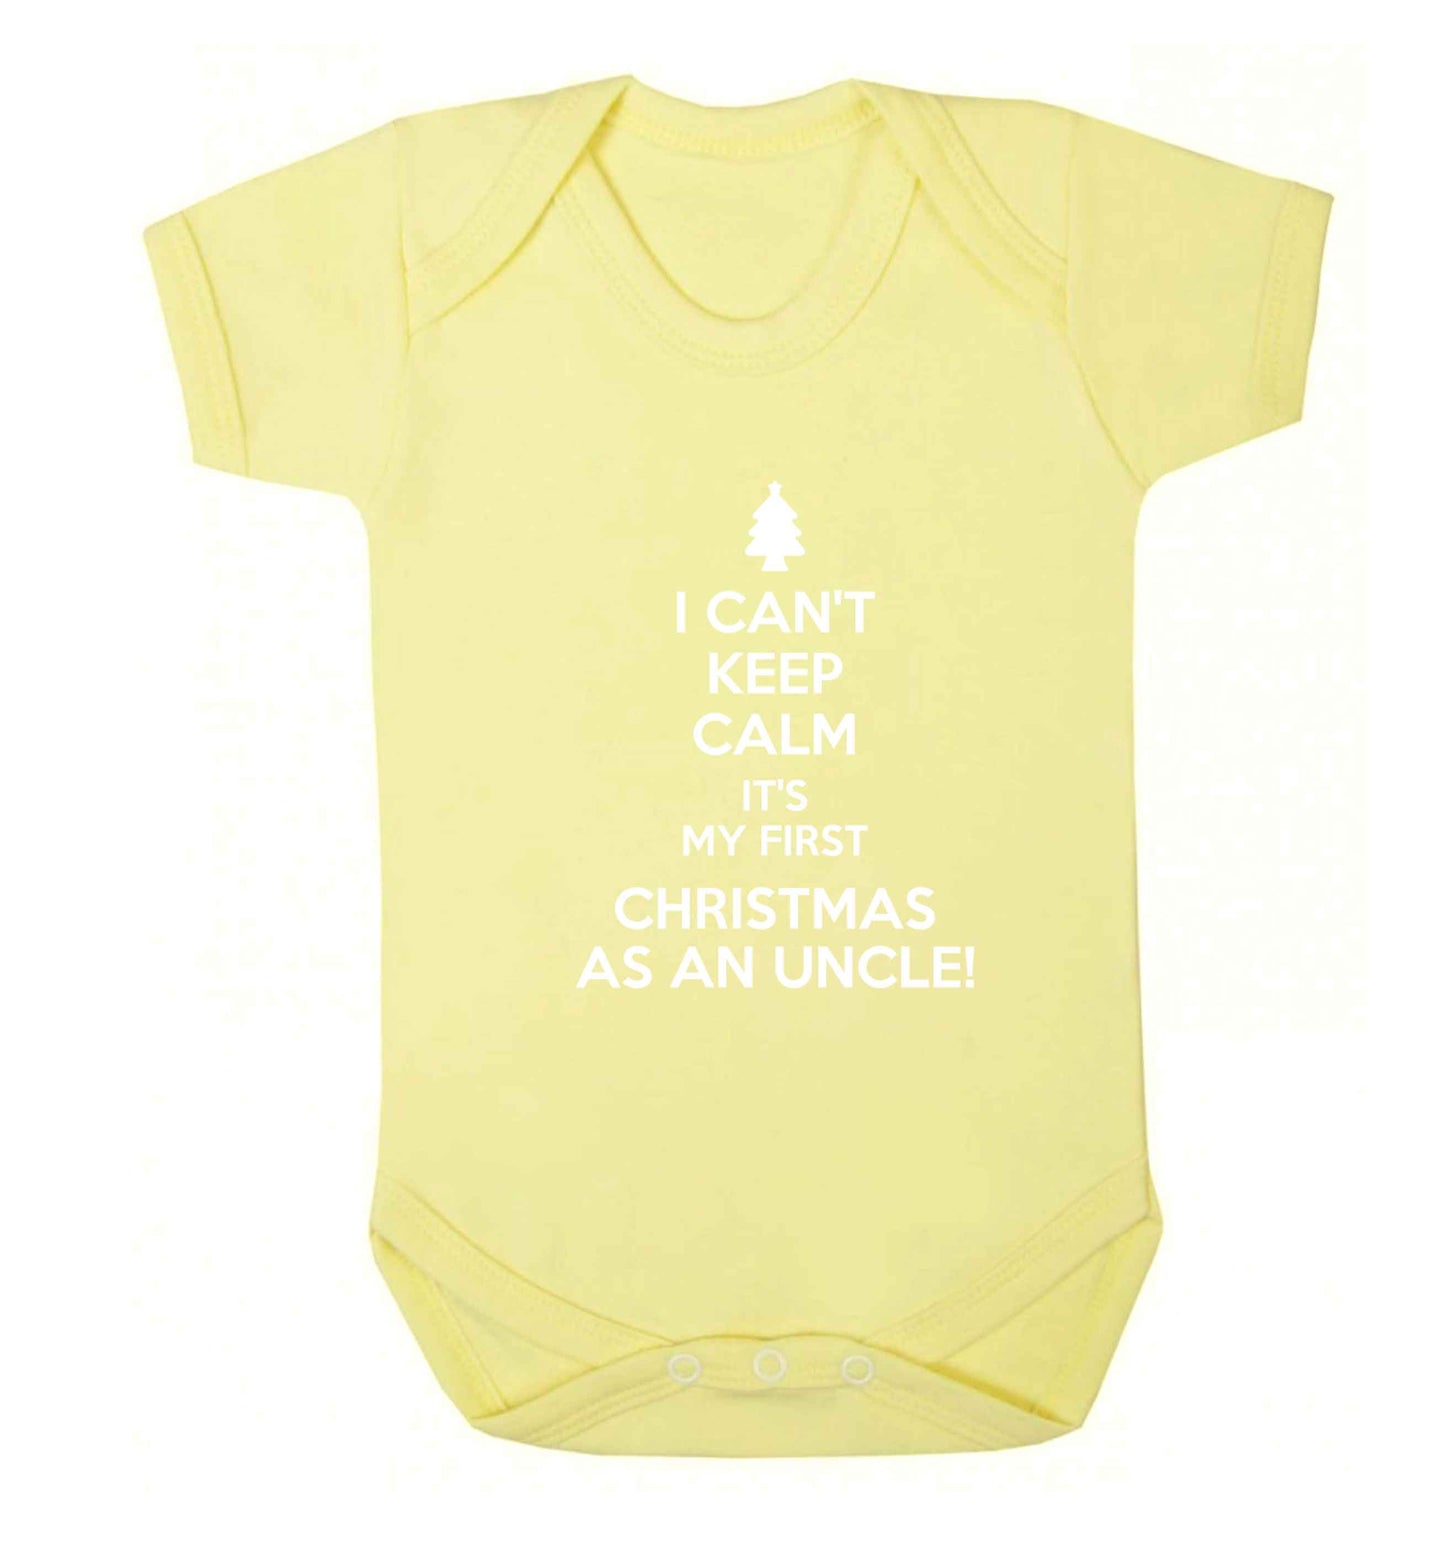 I can't keep calm it's my first Christmas as an uncle! Baby Vest pale yellow 18-24 months